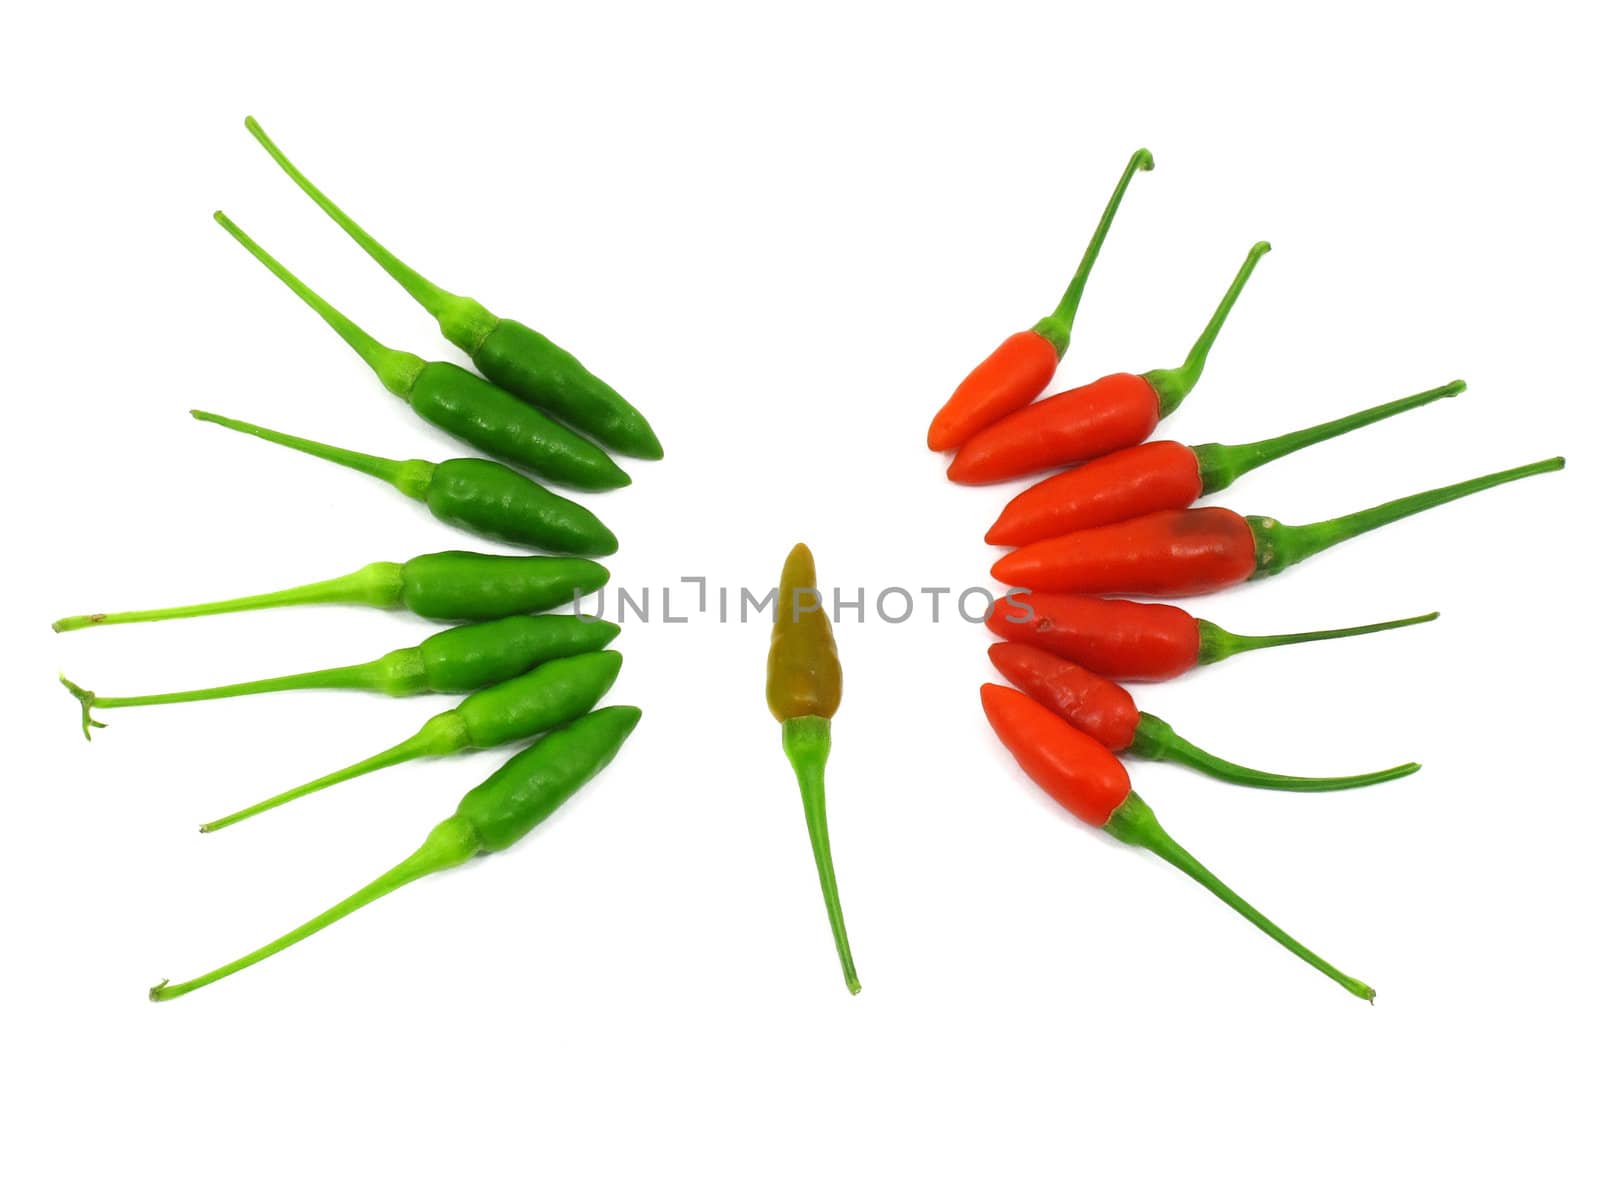 Red and green chilli peppers by iampuay